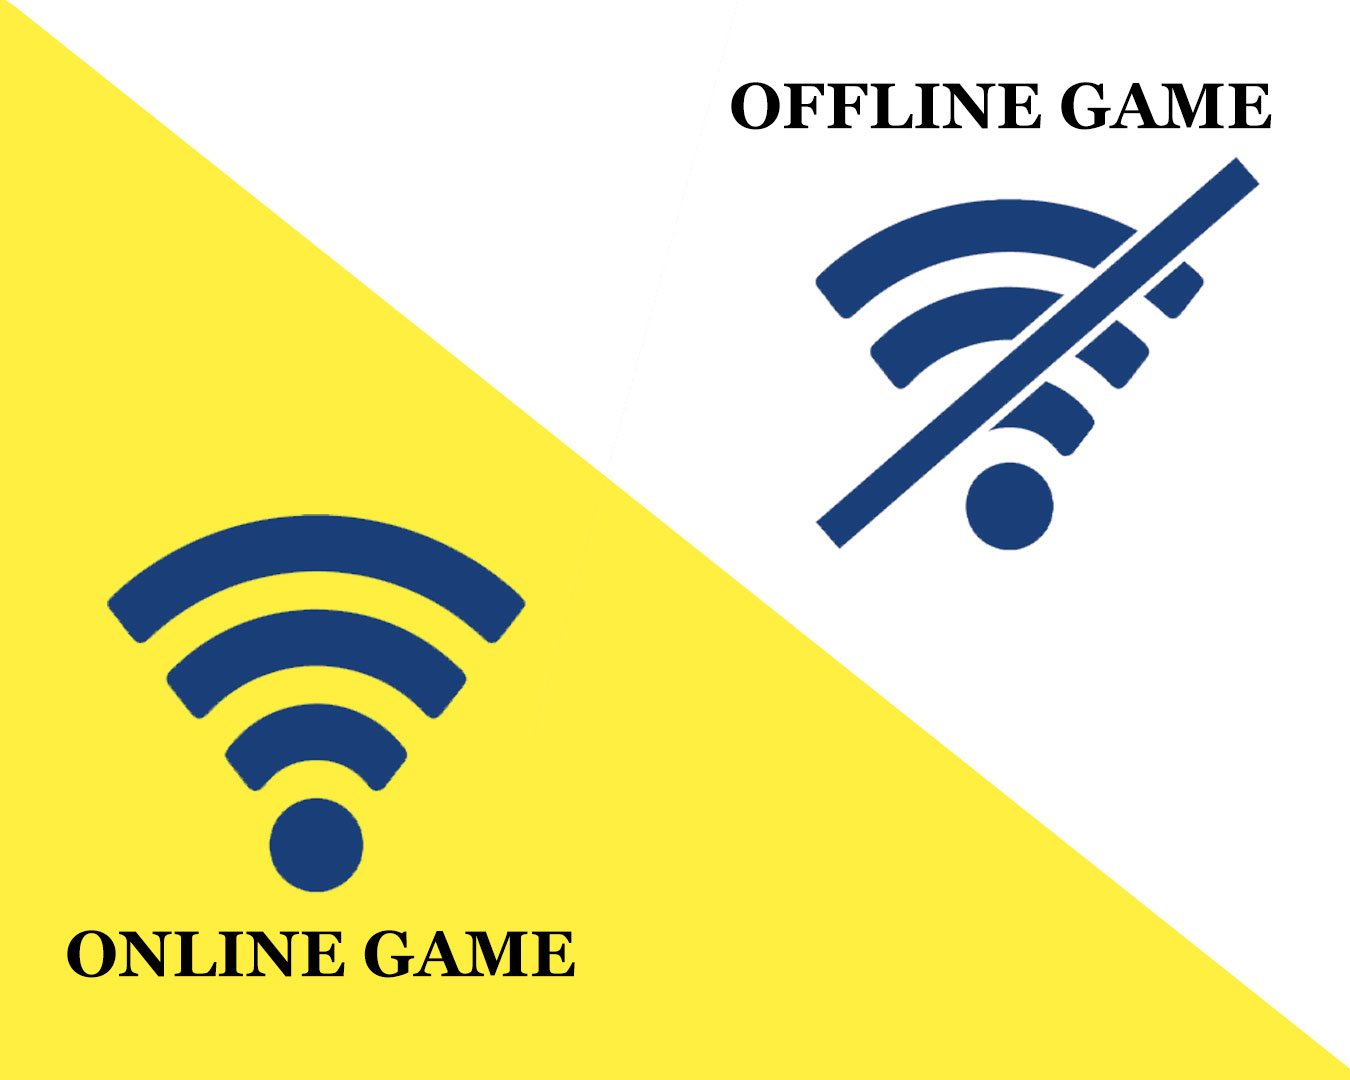 Difference between Offline and Online Games